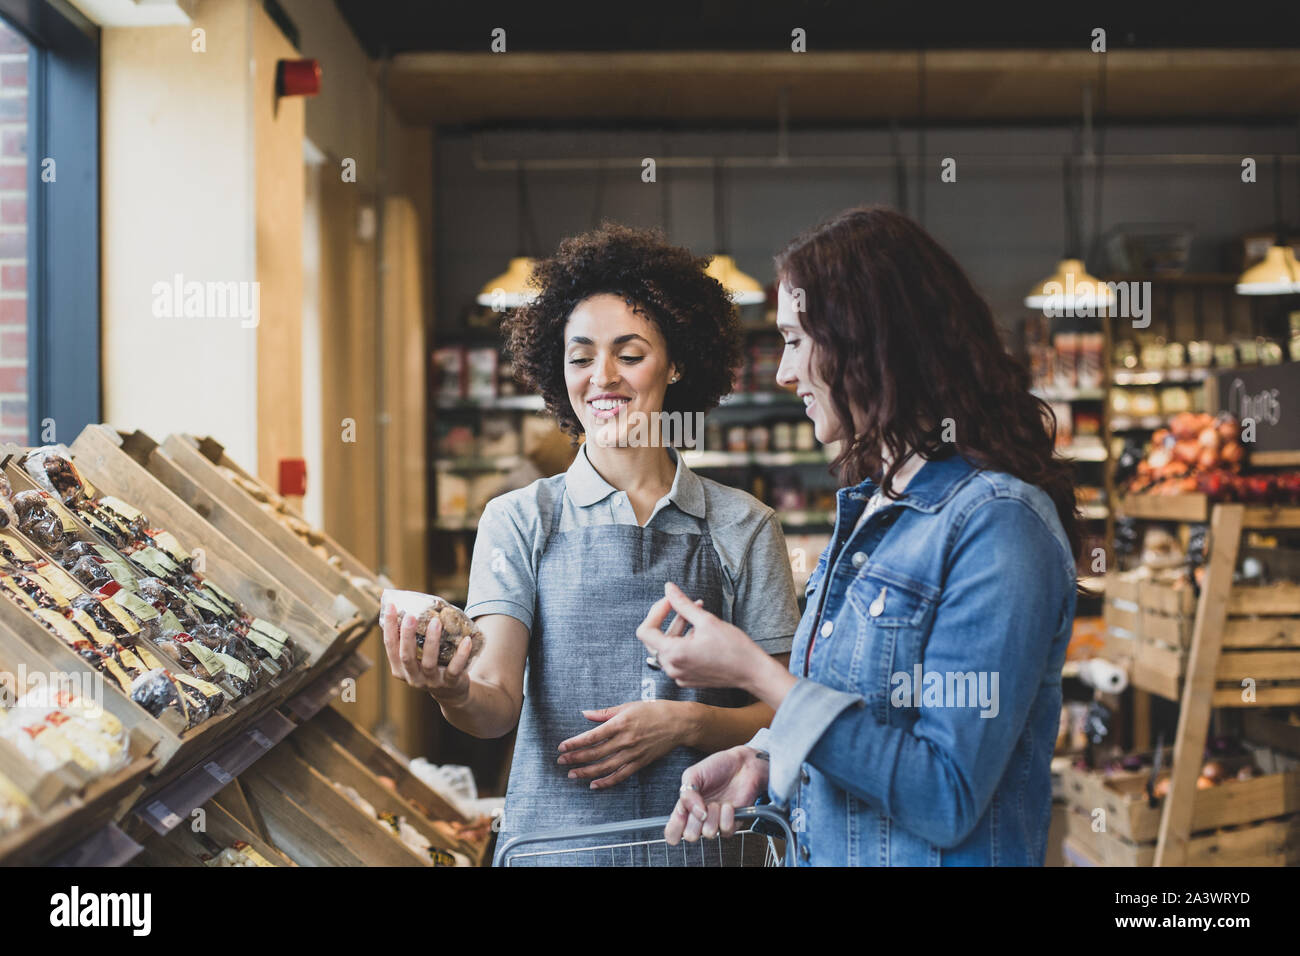 Sales assistant helping customer in a grocery store Stock Photo